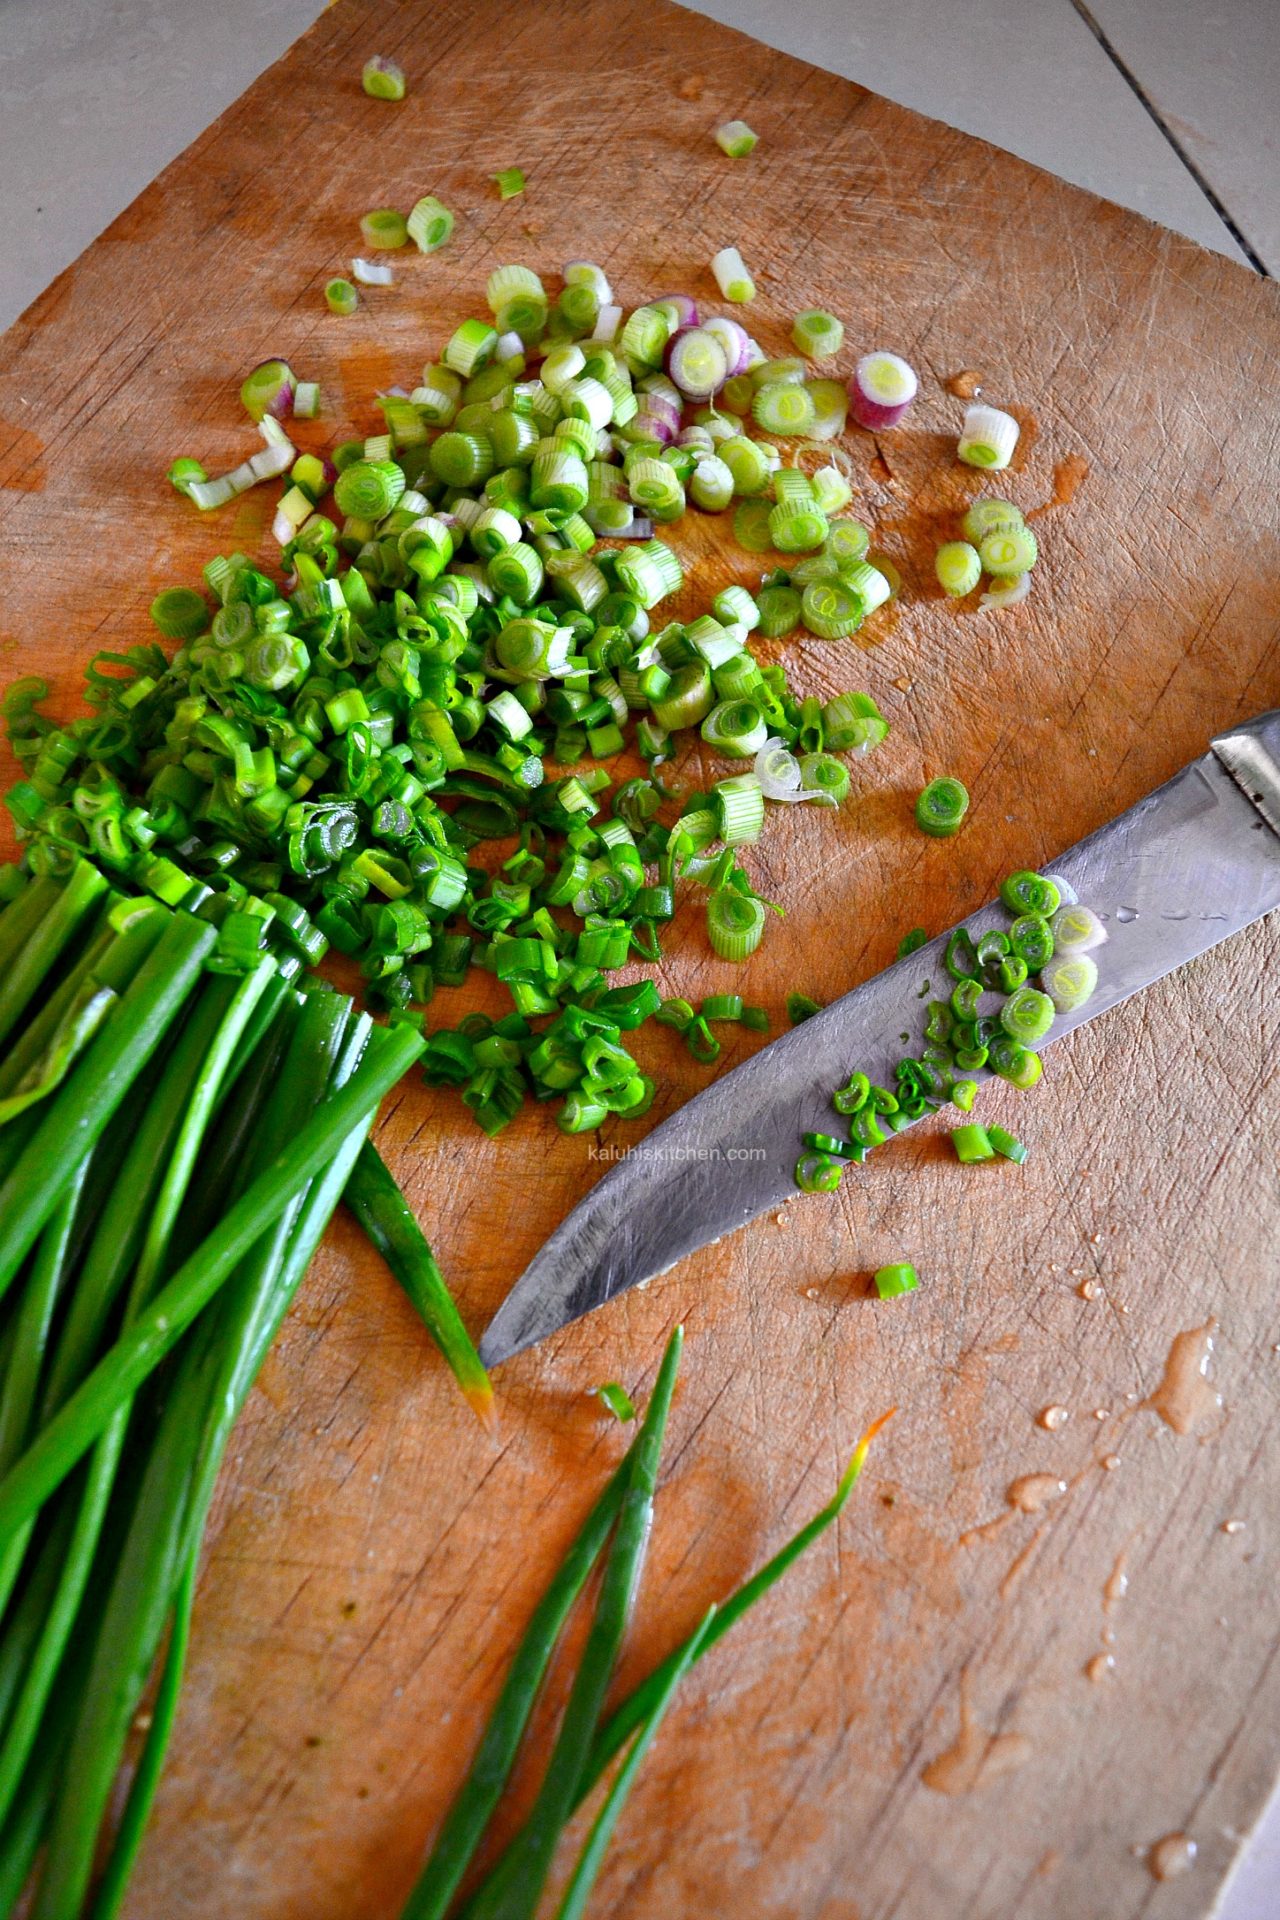 spring onion have a distinct taste and go particularly well with githeri and in the filling of samosas_kaluhiskitchen.com